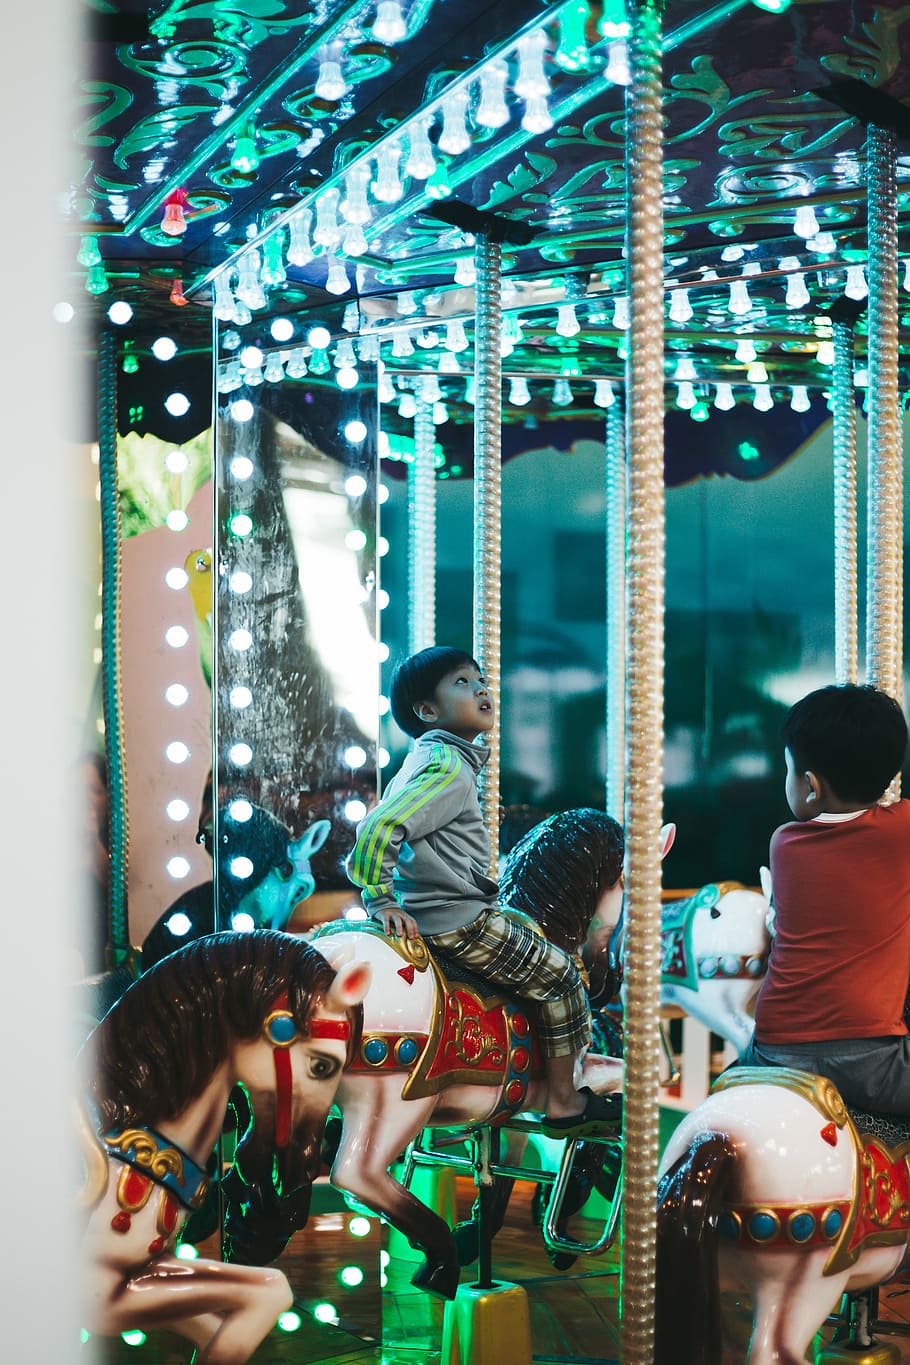 boy riding on carousel, boy riding carousel starring at ceiling with LED lights